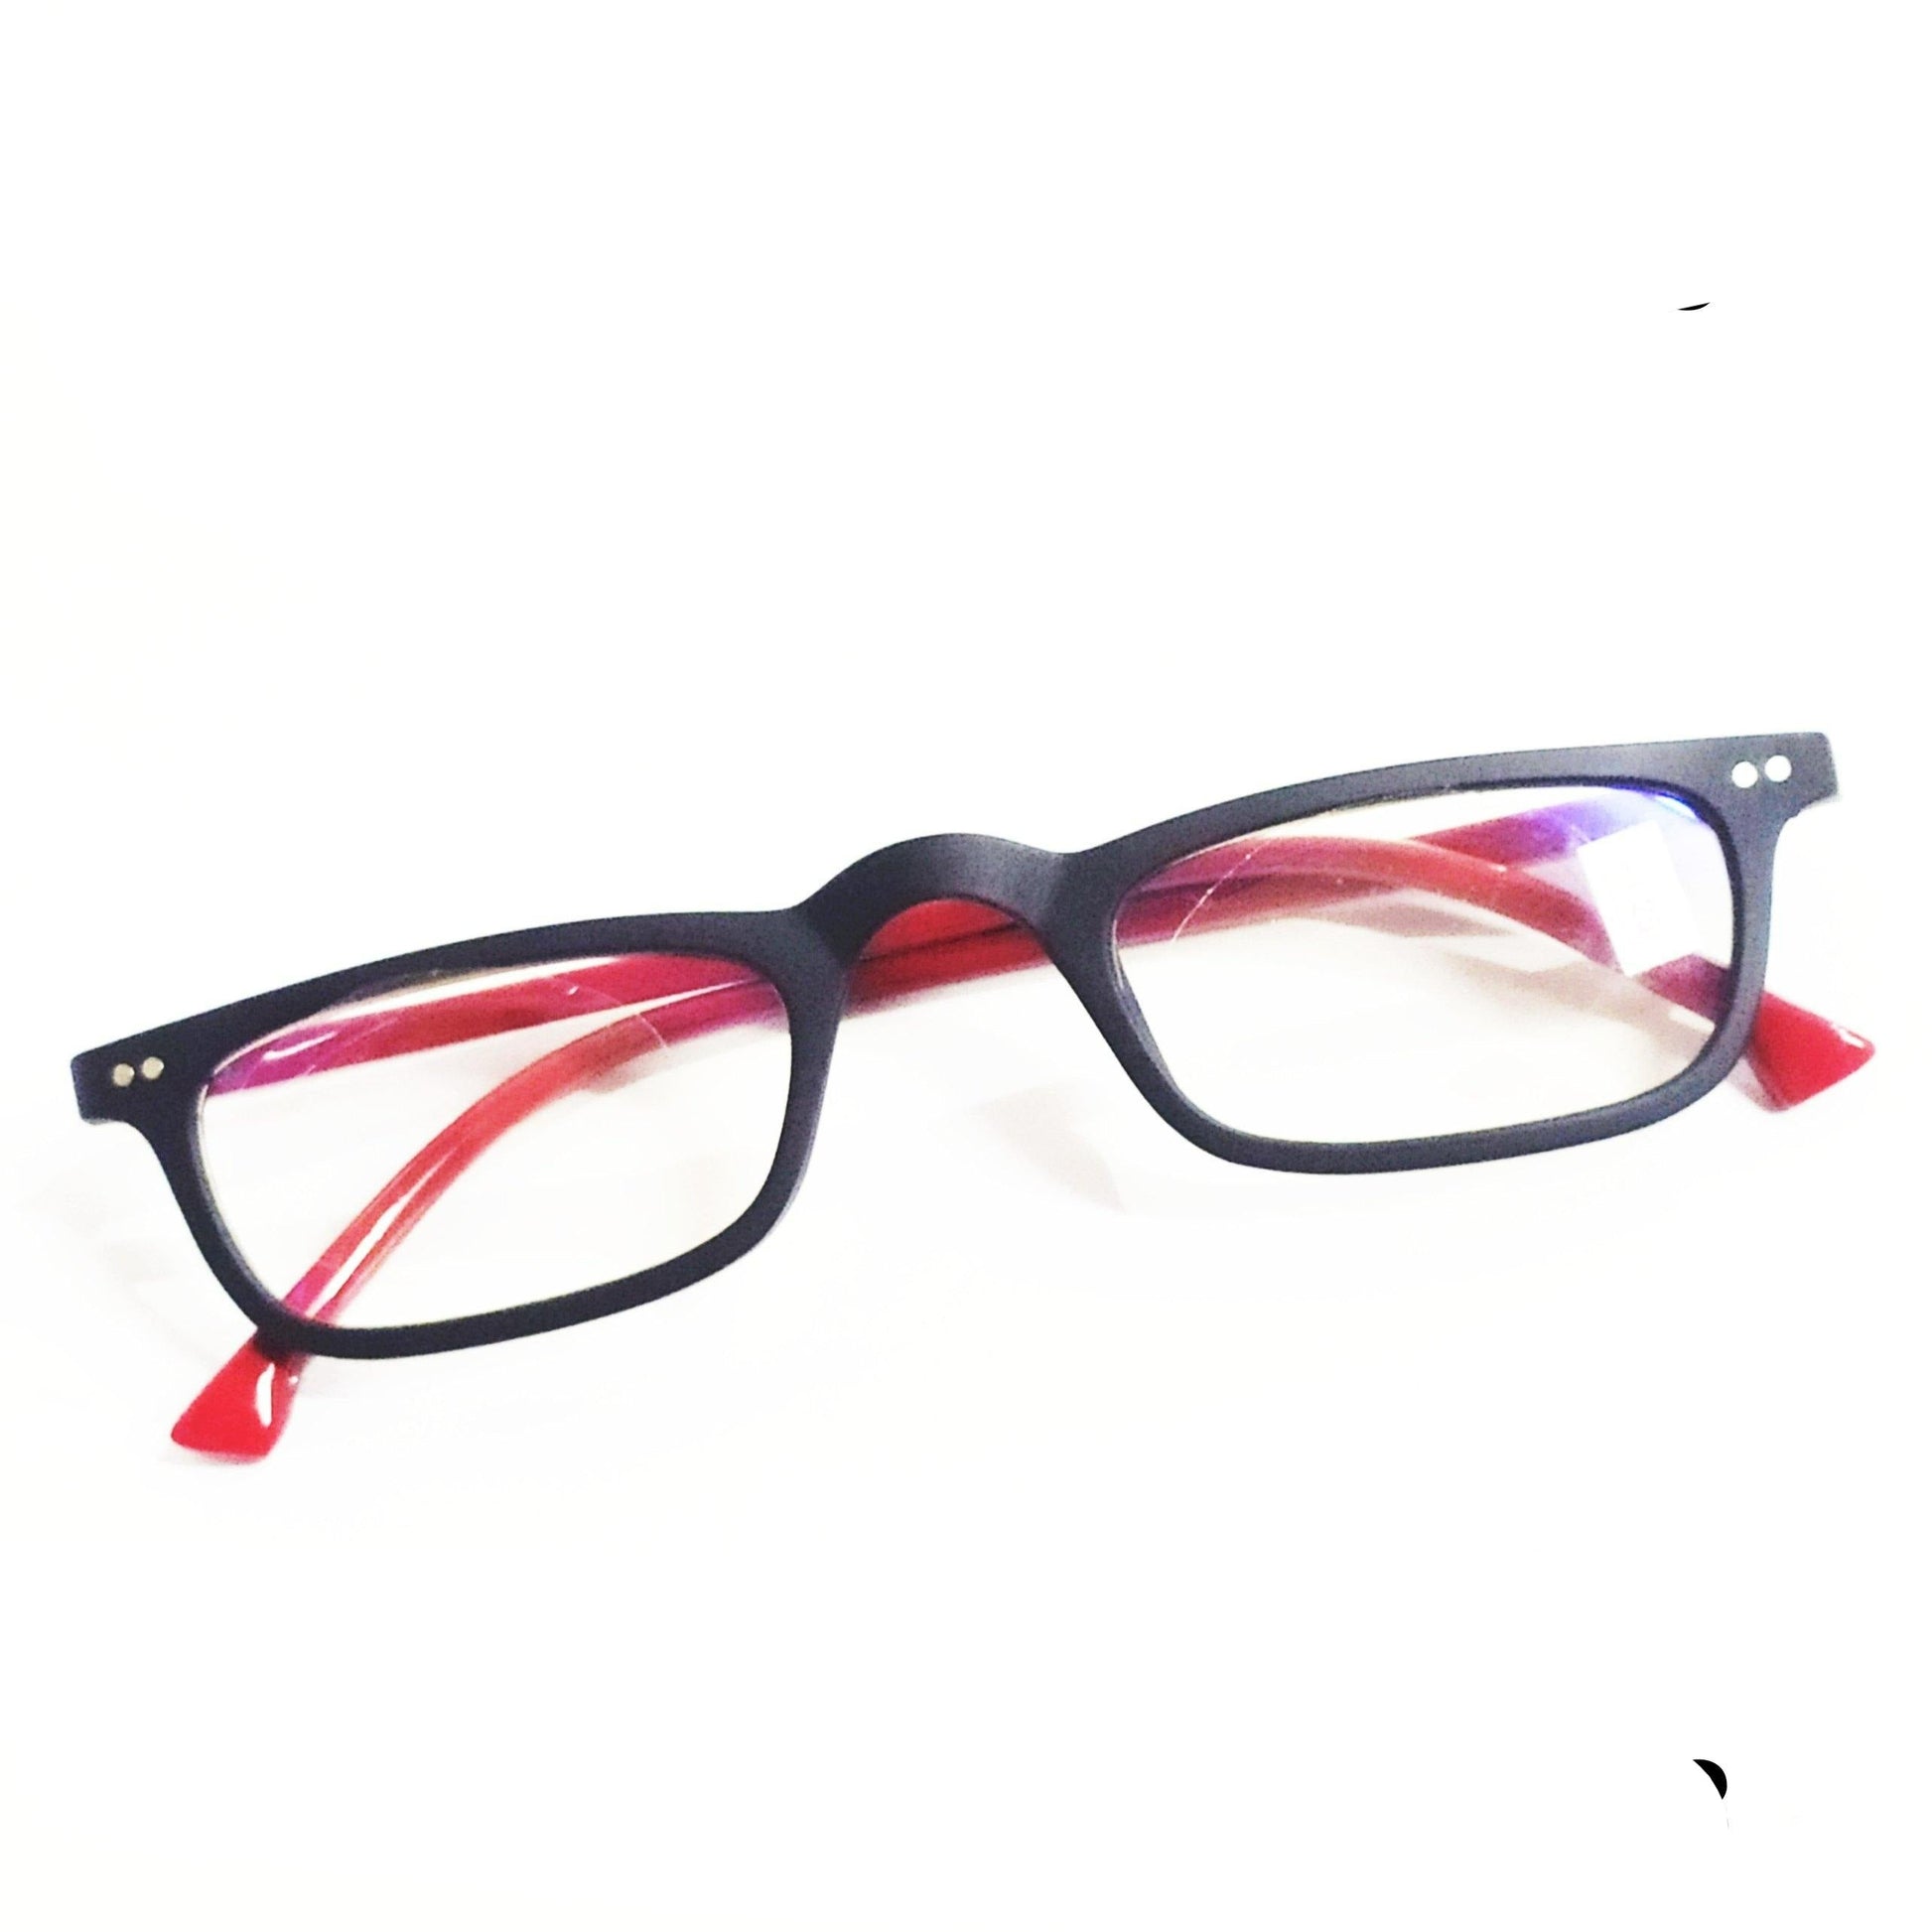 Buy Black Red Full Frame Computer Reading Glasses with Anti Glare Coating Power 1.25 - Glasses India Online in India